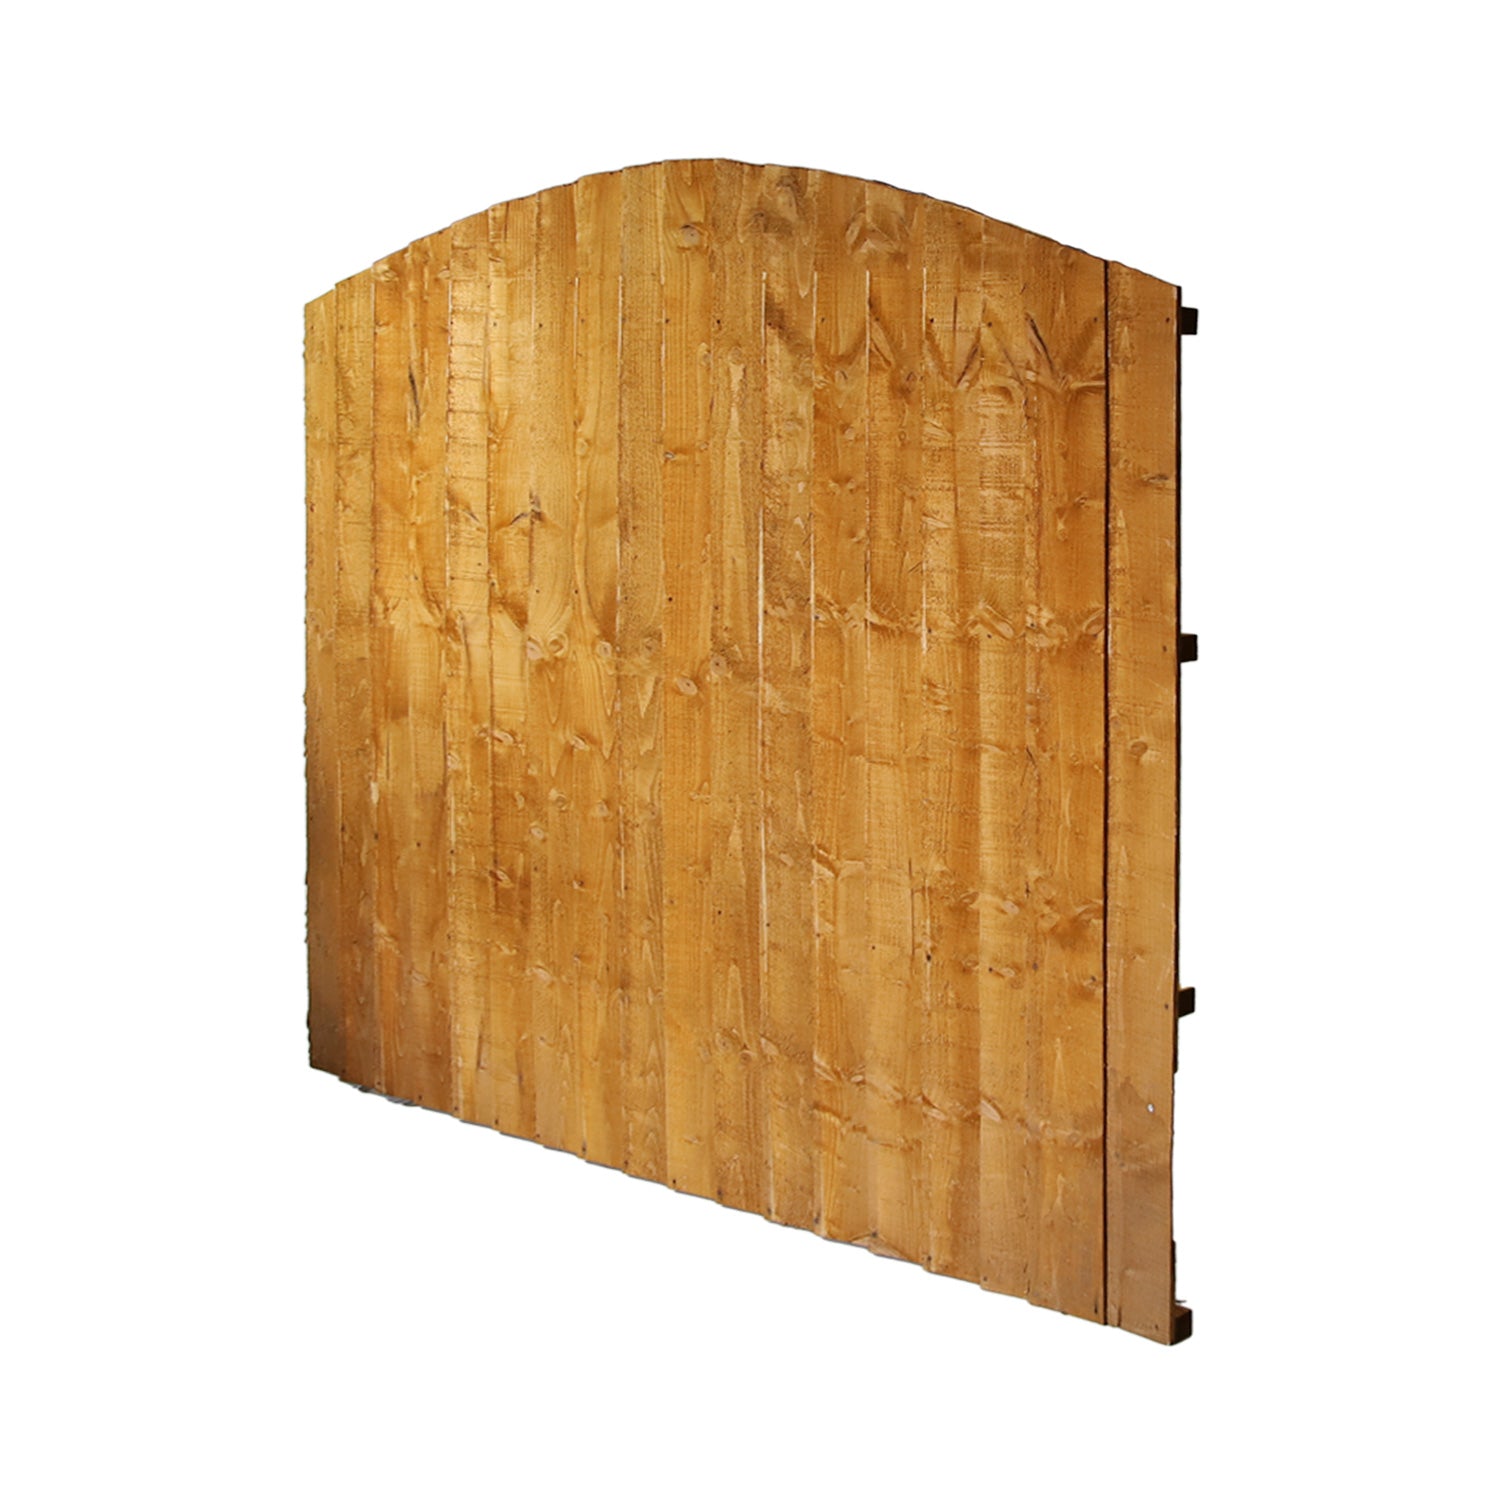 6' x 5' + Dome Featheredge Fence Panel